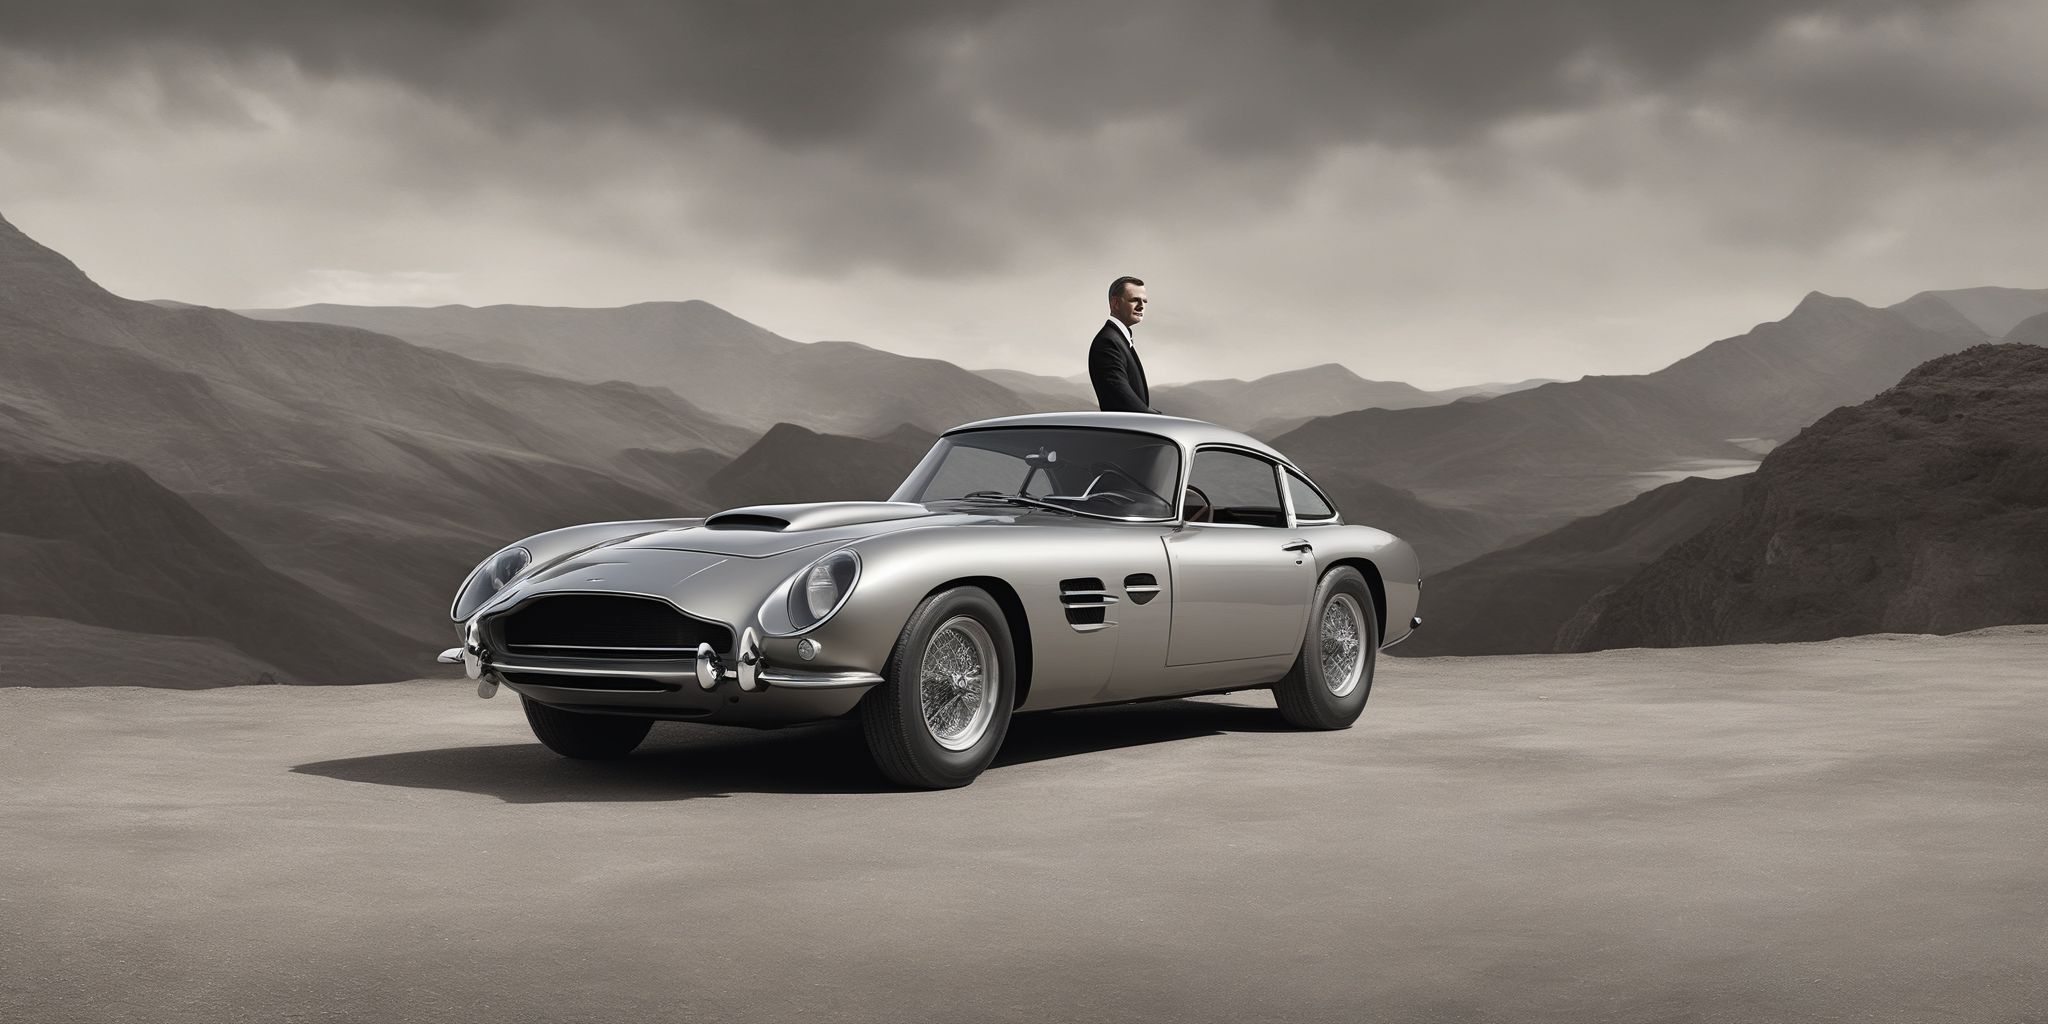 Bond  in realistic, photographic style